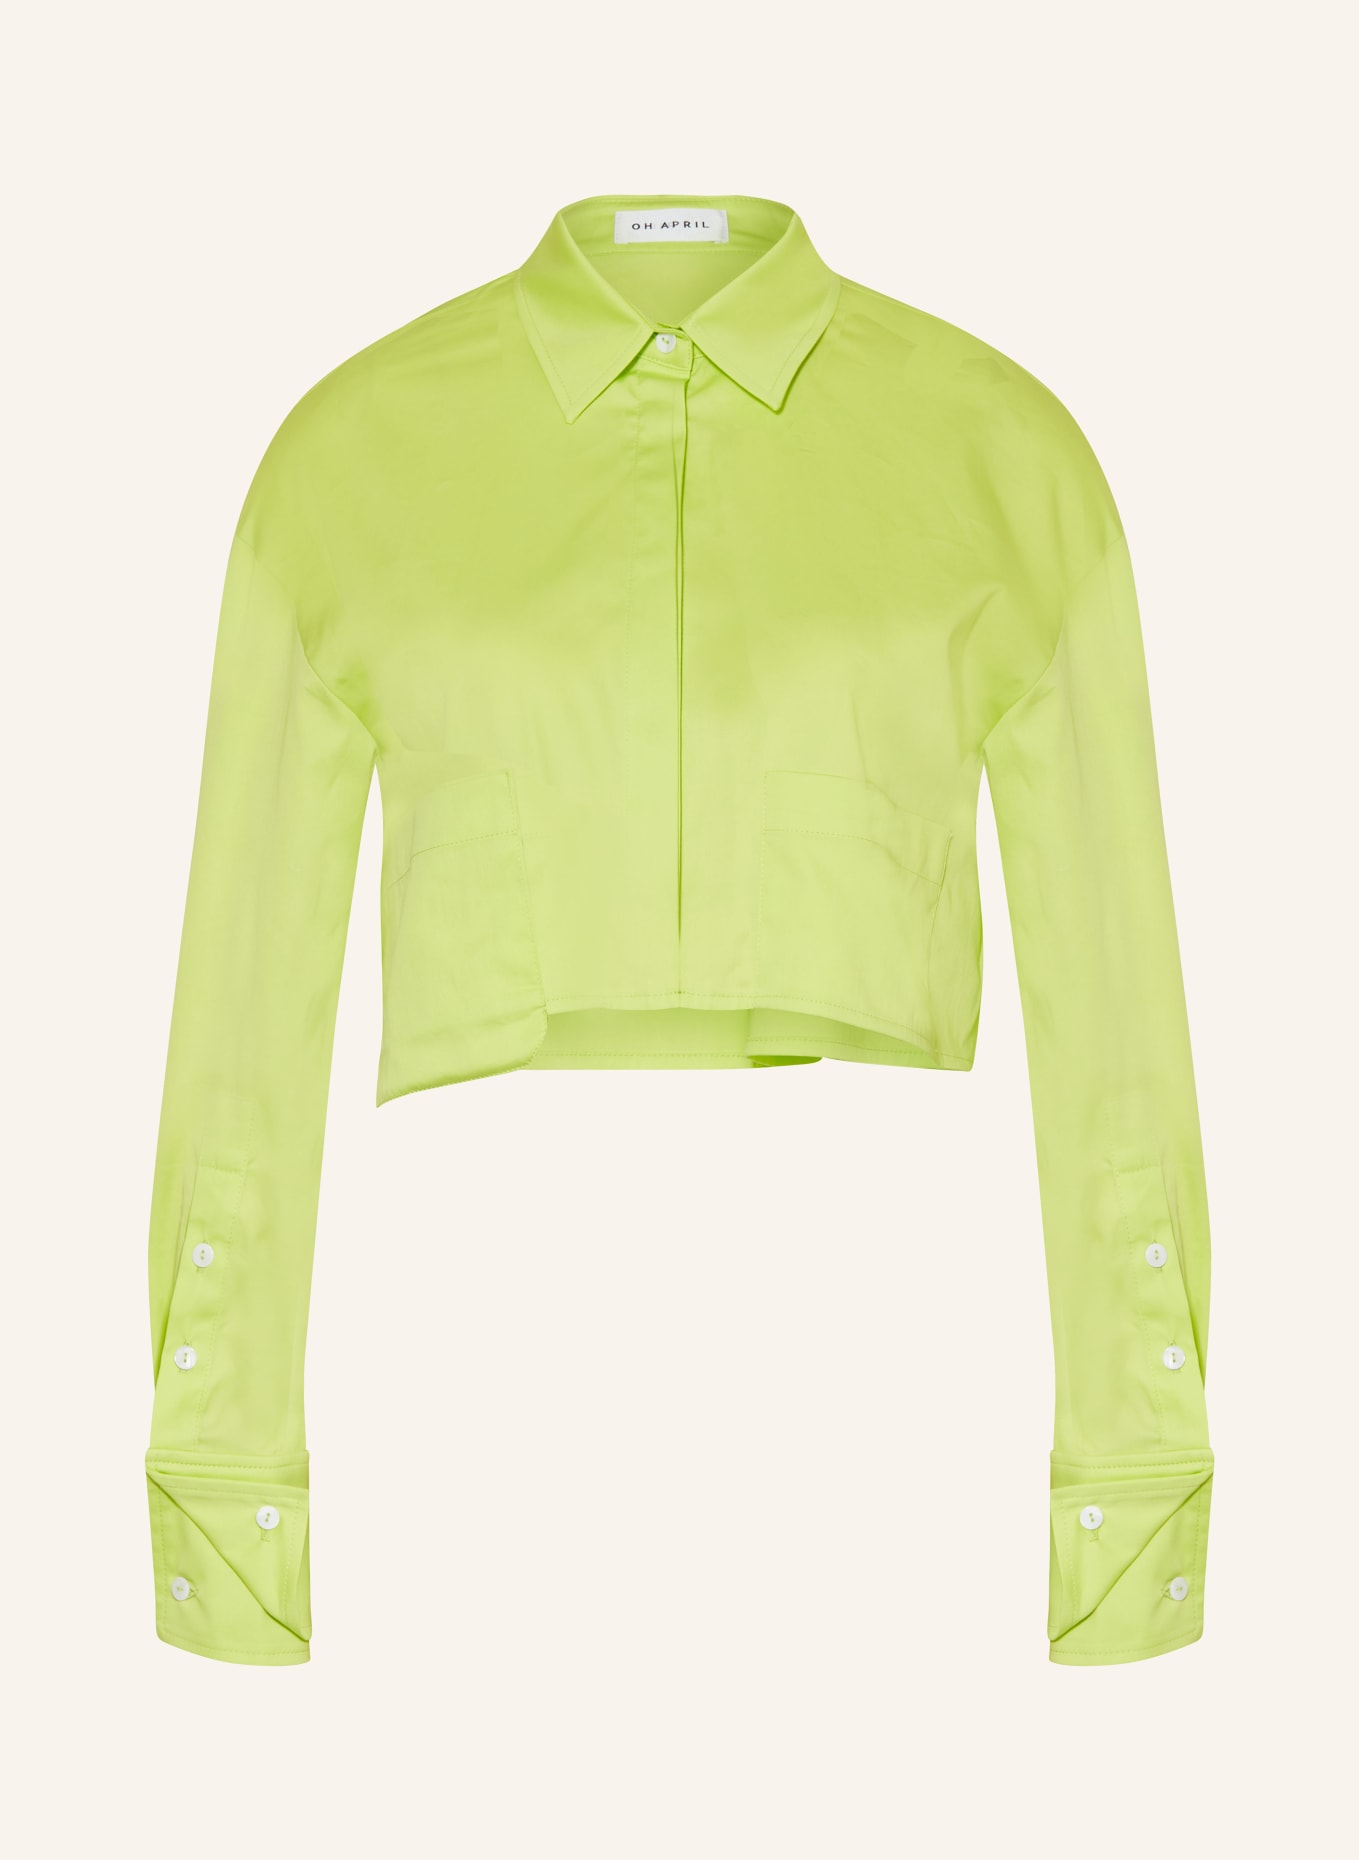 OH APRIL Cropped-Hemdbluse ARIA, Farbe: LIME LIME (Bild 1)